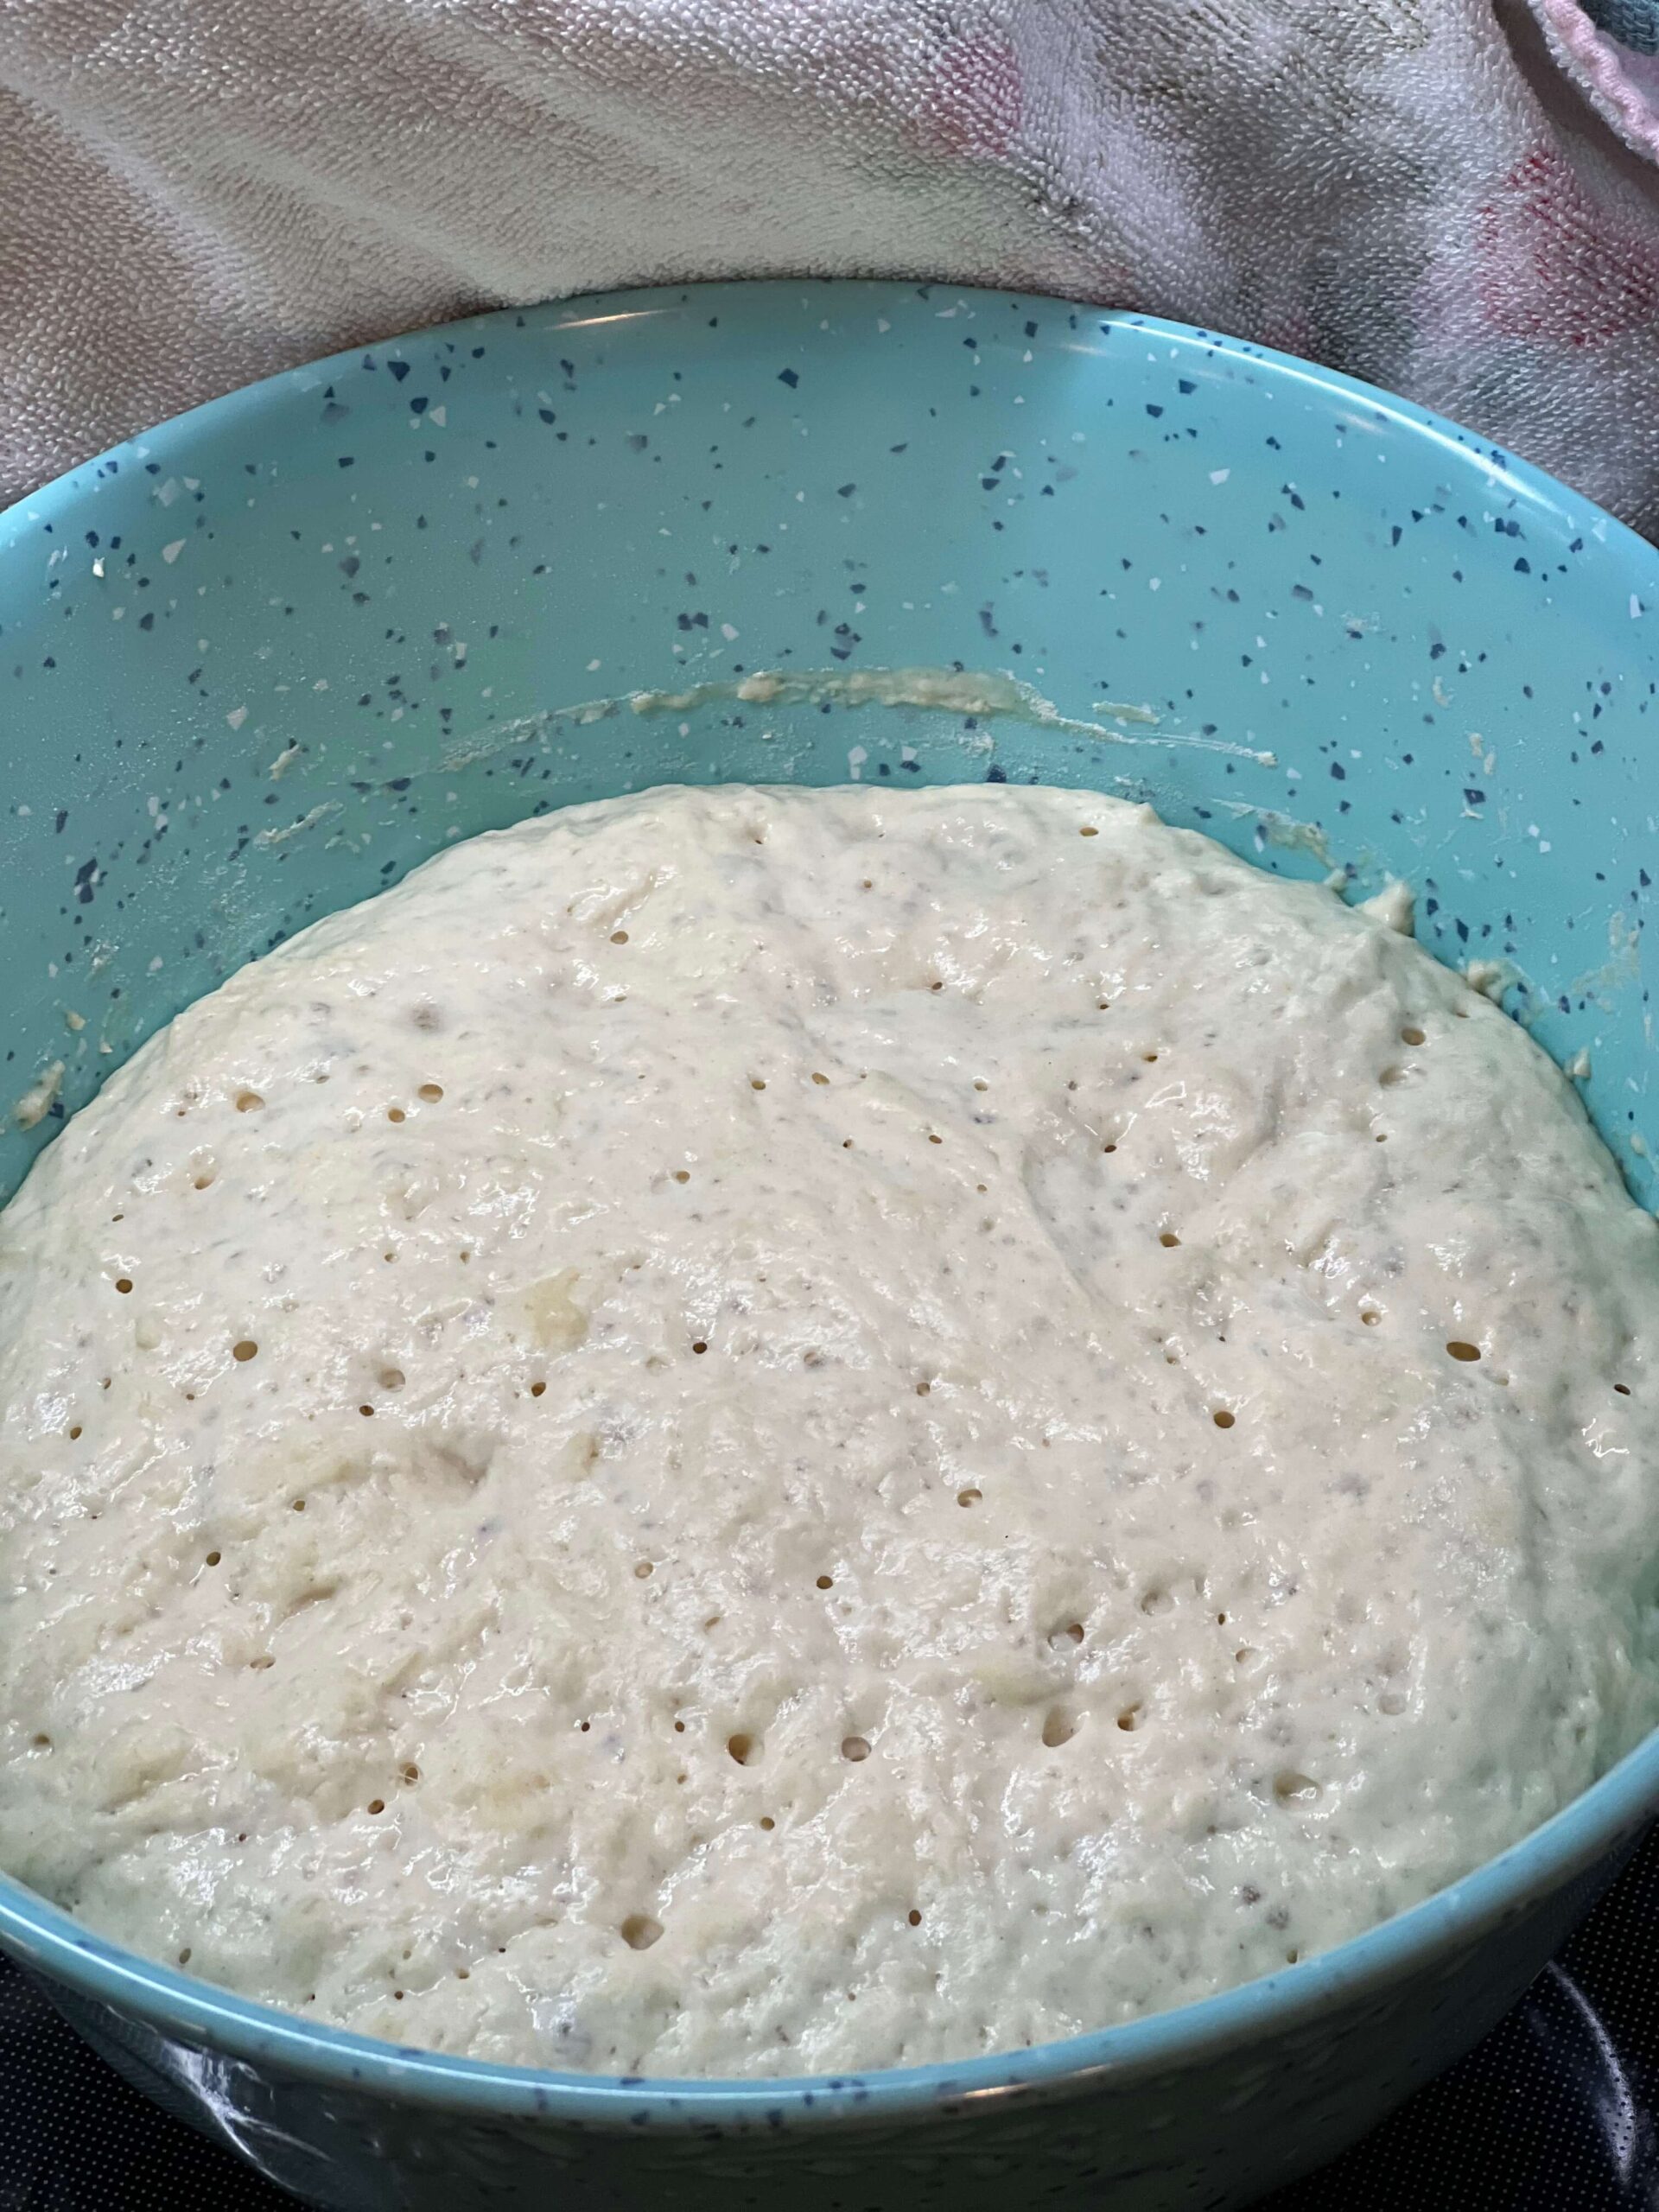 The peasant dough is ready to split up into small baking dishes.